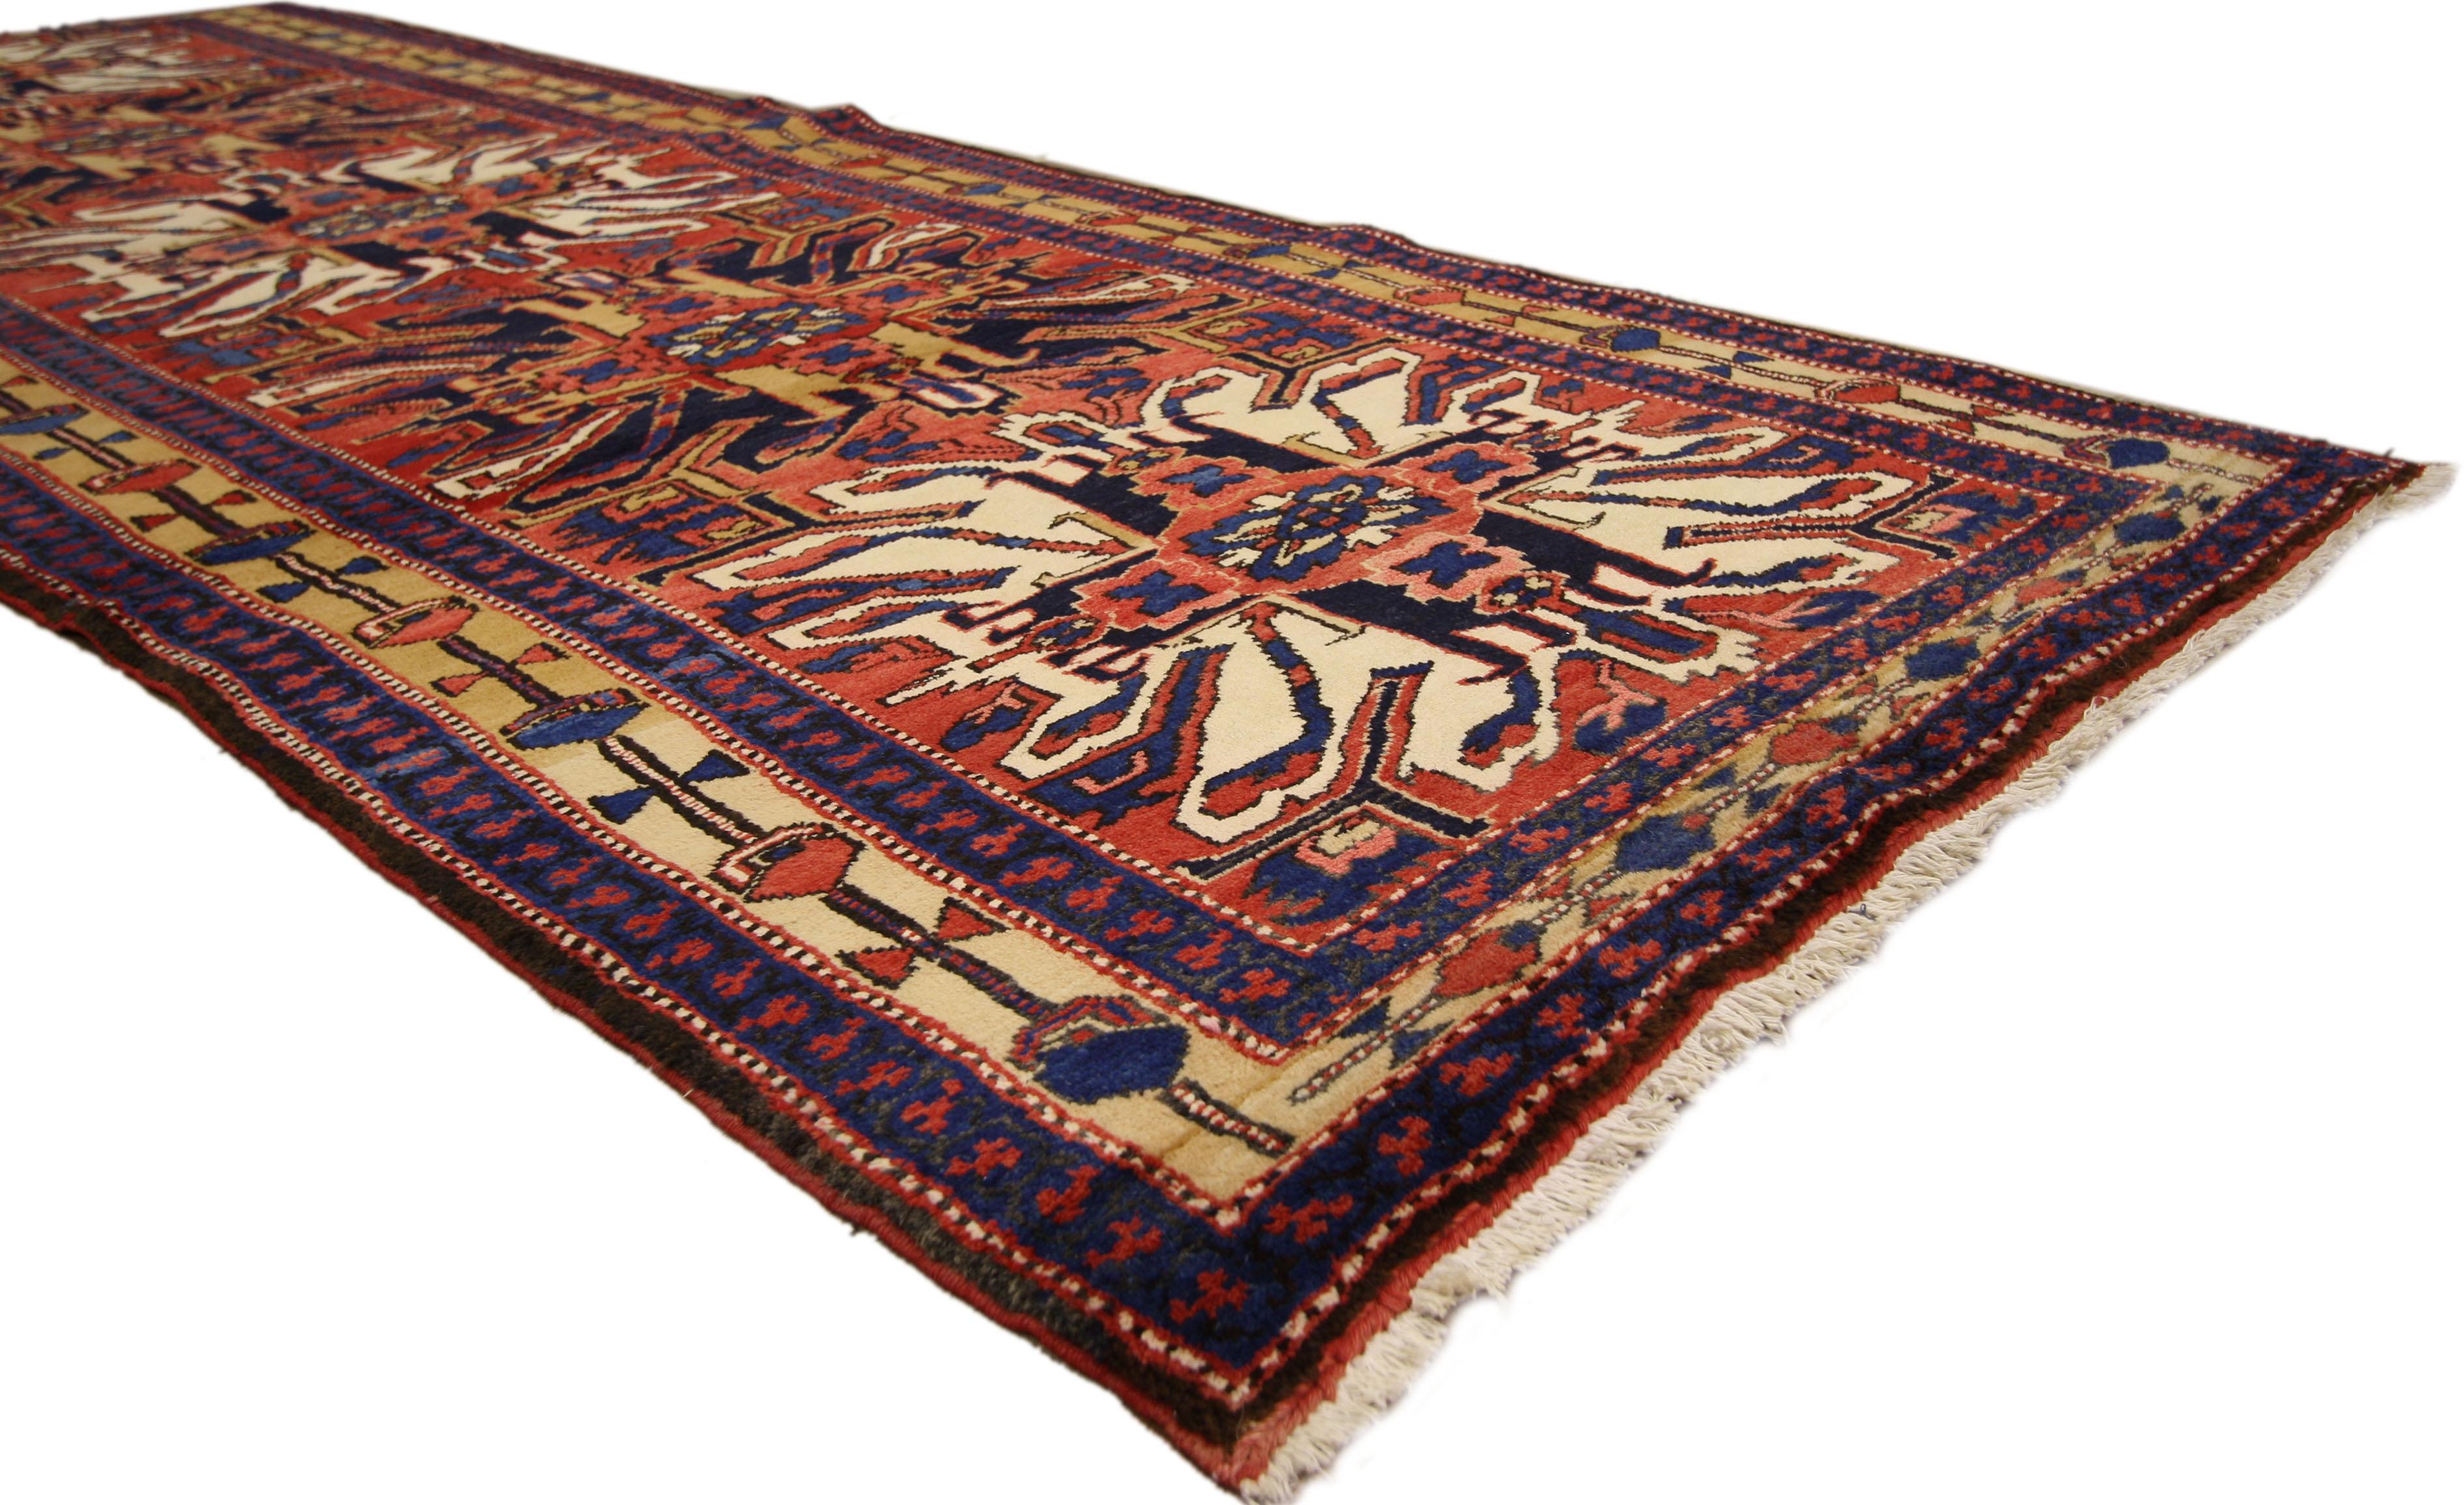 ​75377 Vintage Persian Azerbaijan Runner, Tribal Style Hallway Azari Runner 03'09 x 10'03. This hand-knotted wool vintage Persian Azari runner with abstract tribal style features five embellished amulet medallions in an abrashed ruby red field. It